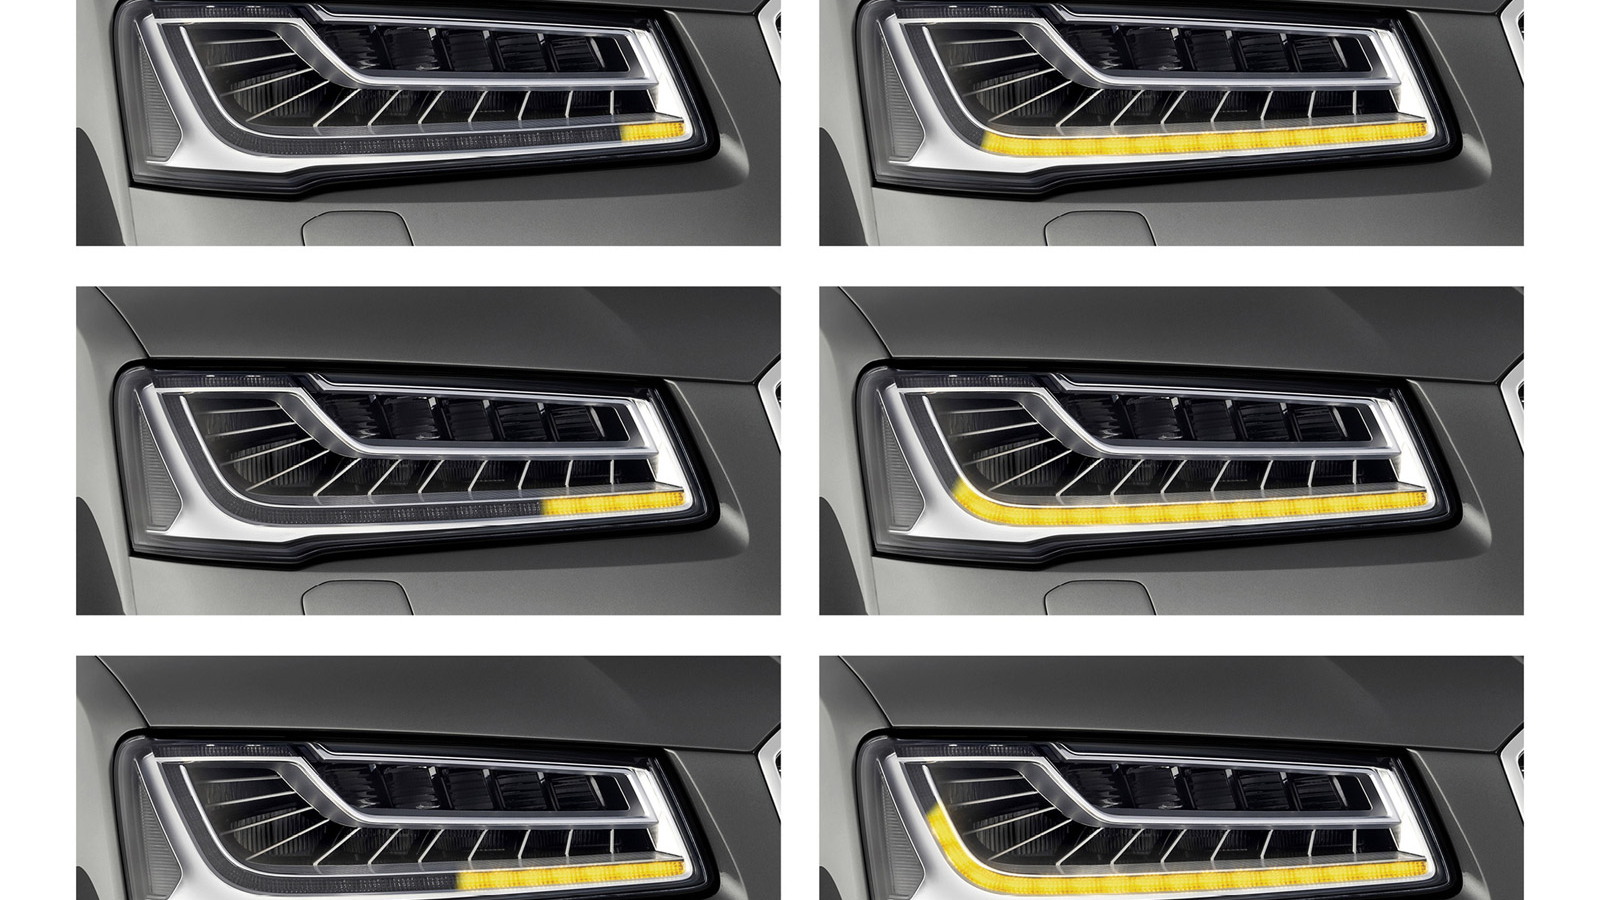 2015 Audi A8’s sequential turn signal